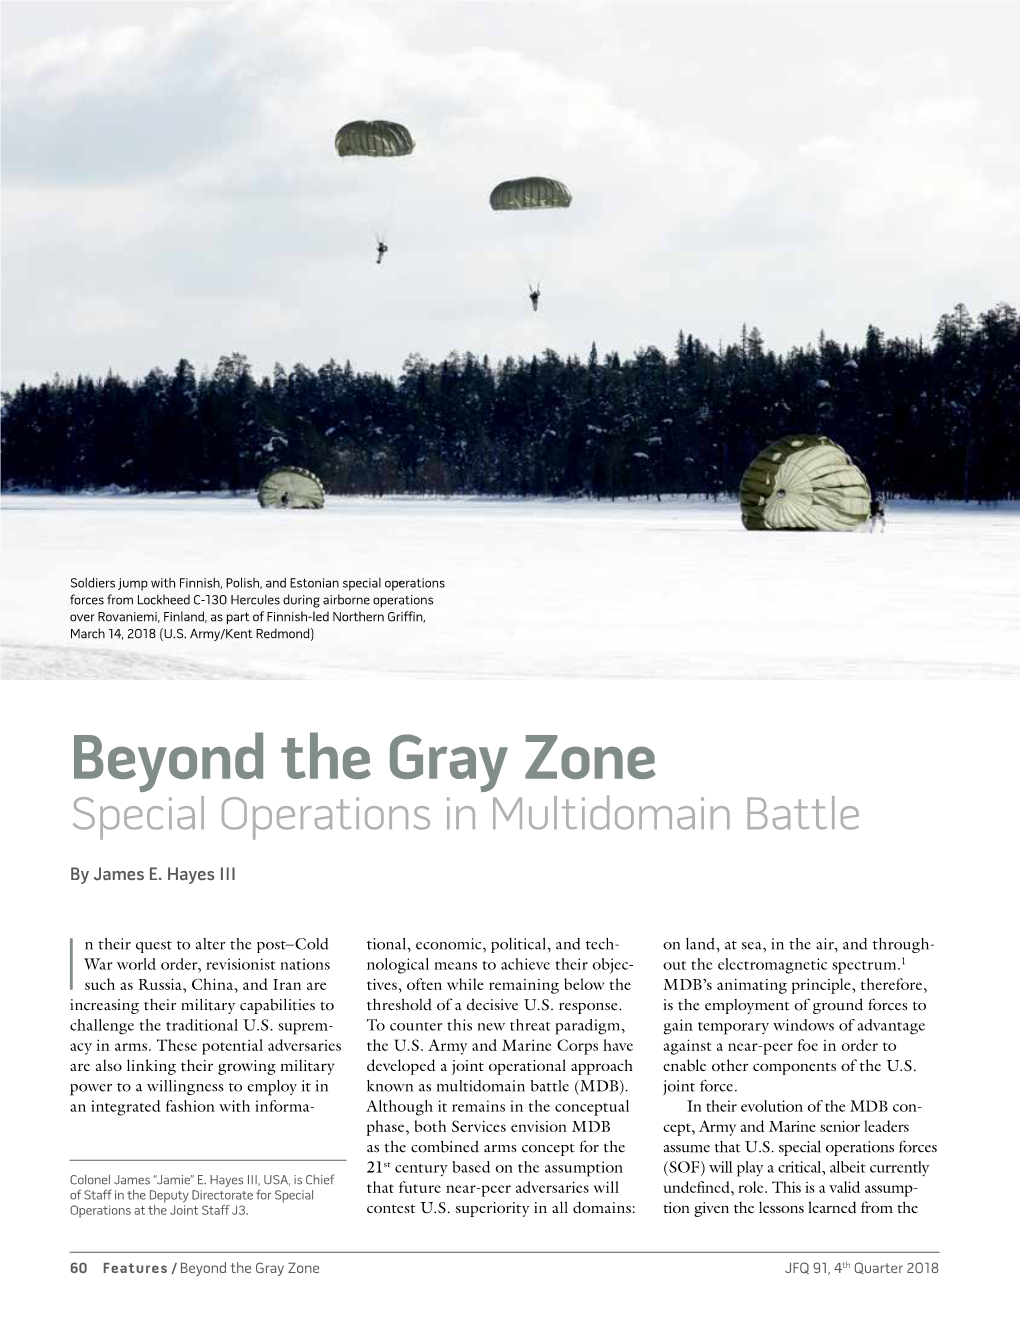 Beyond the Gray Zone: Special Operations in Multidomain Battle